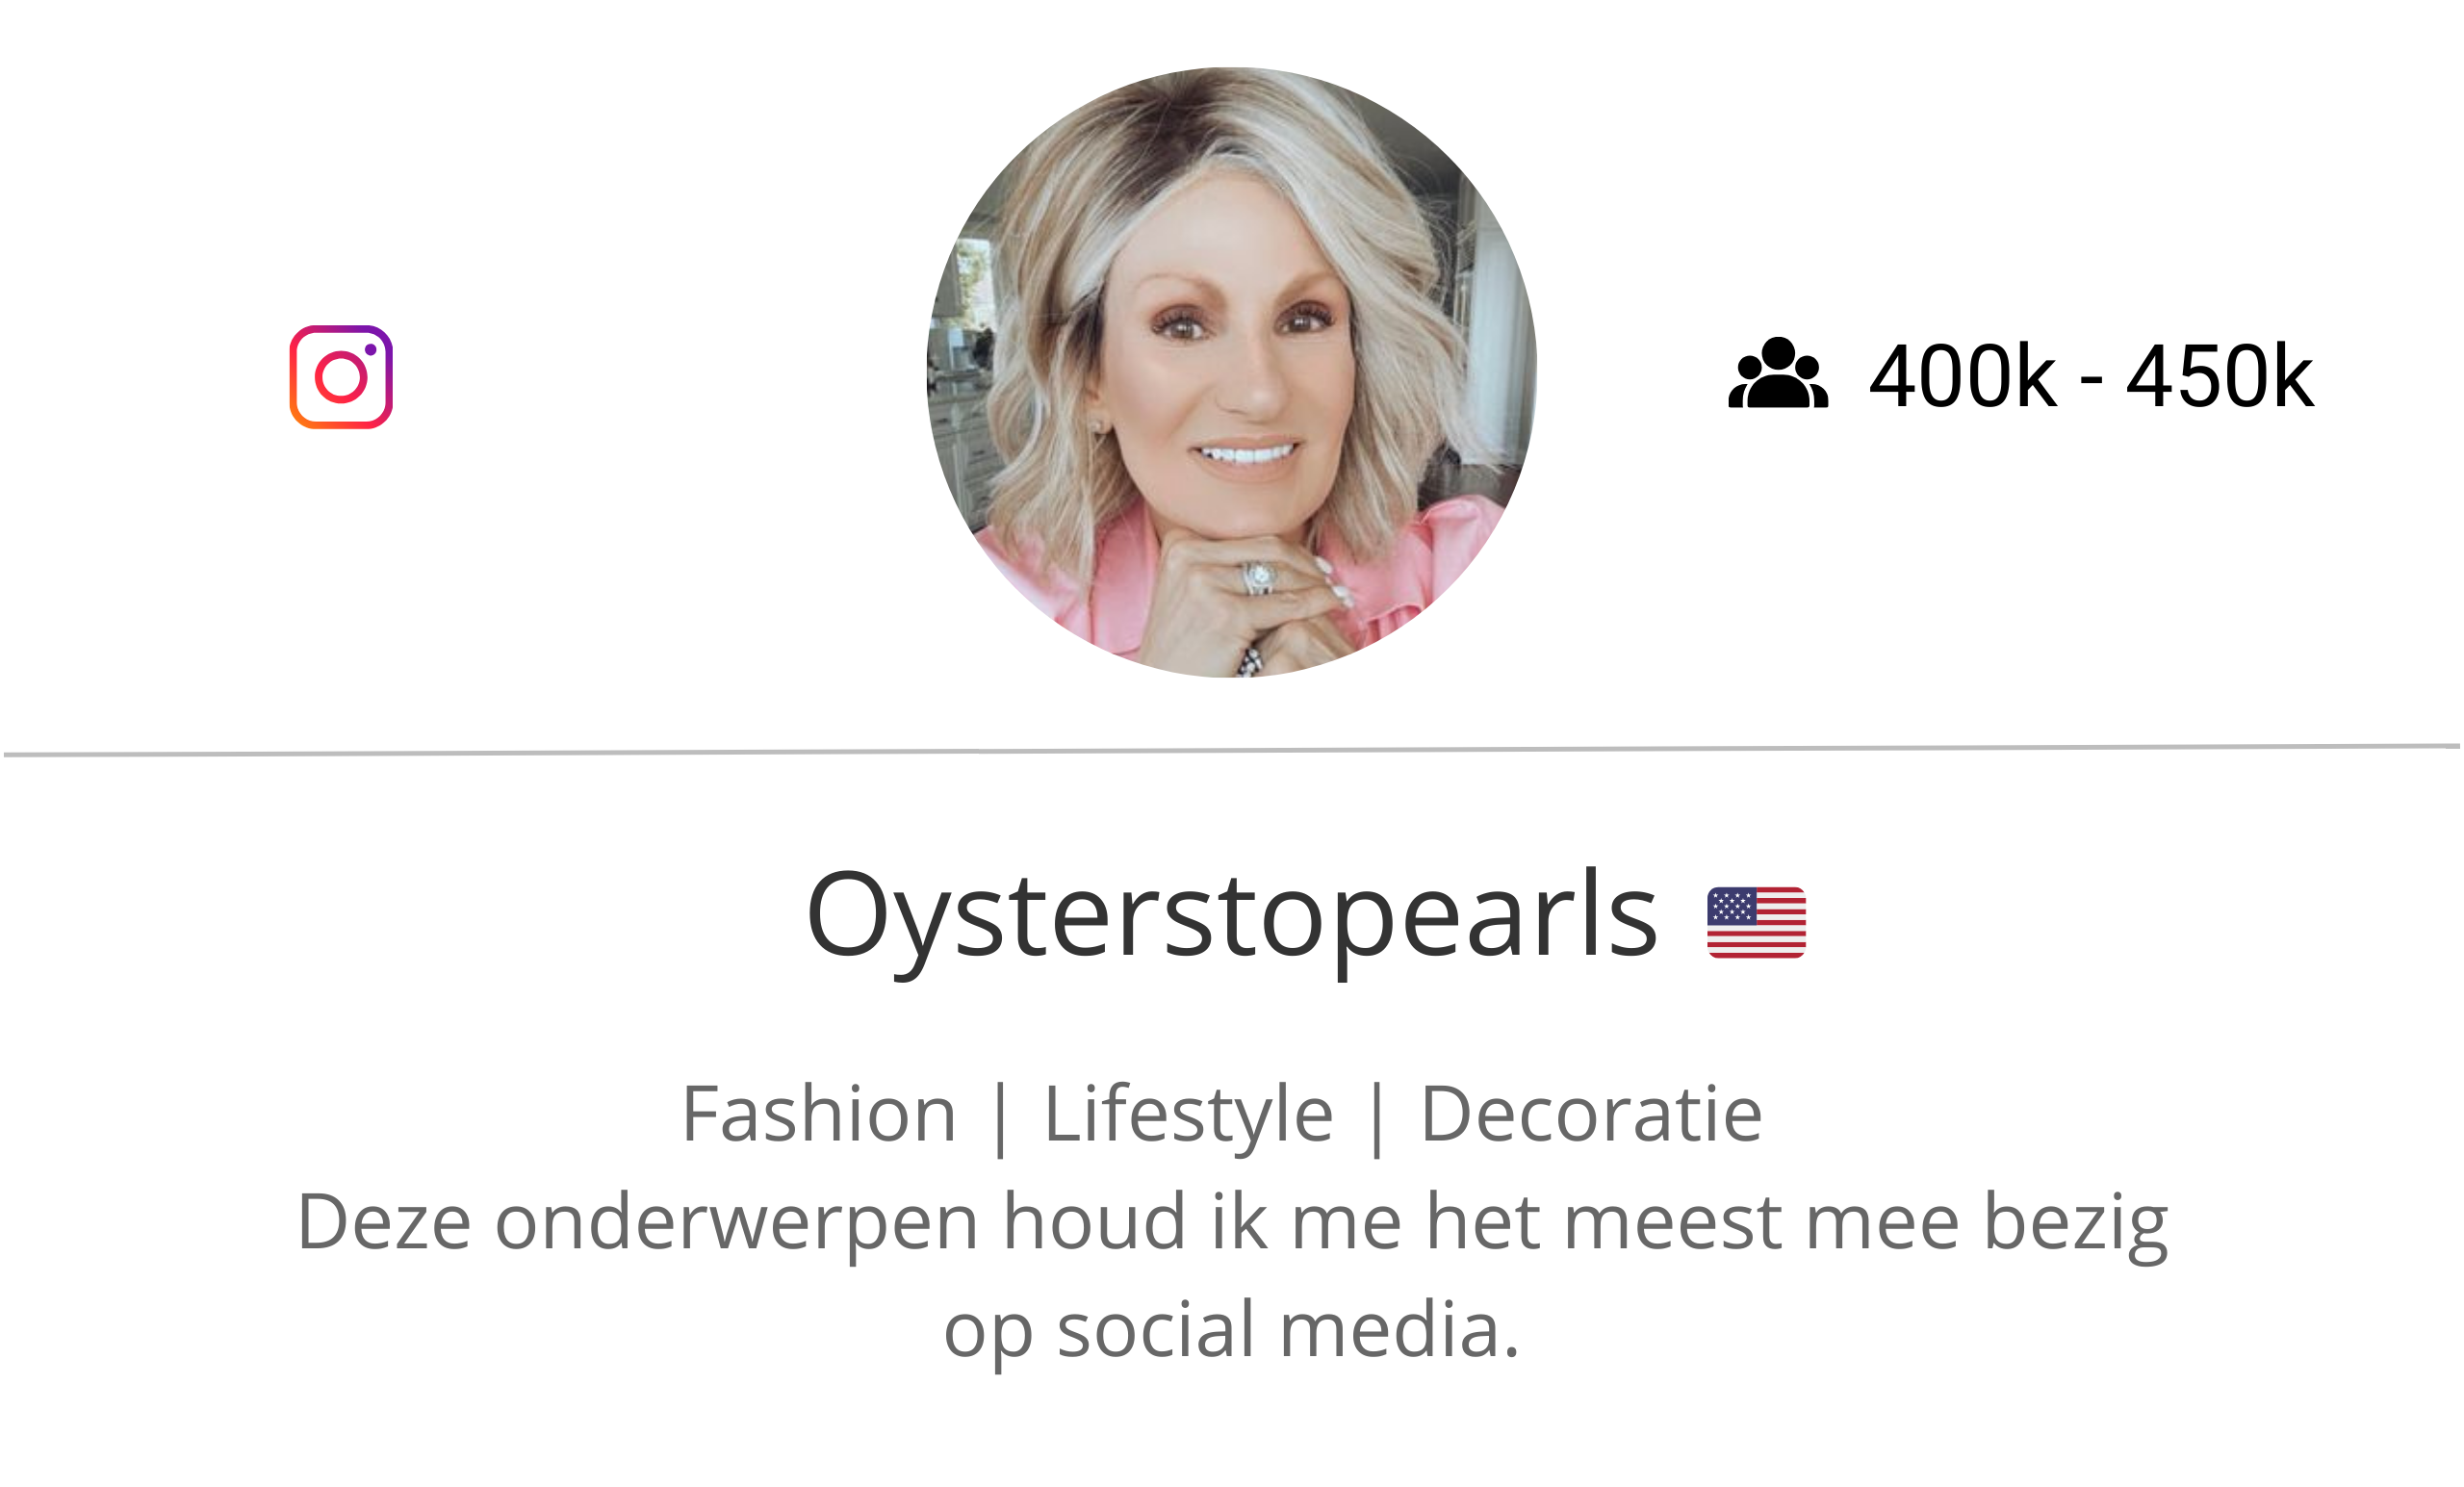 Oysterstopearls